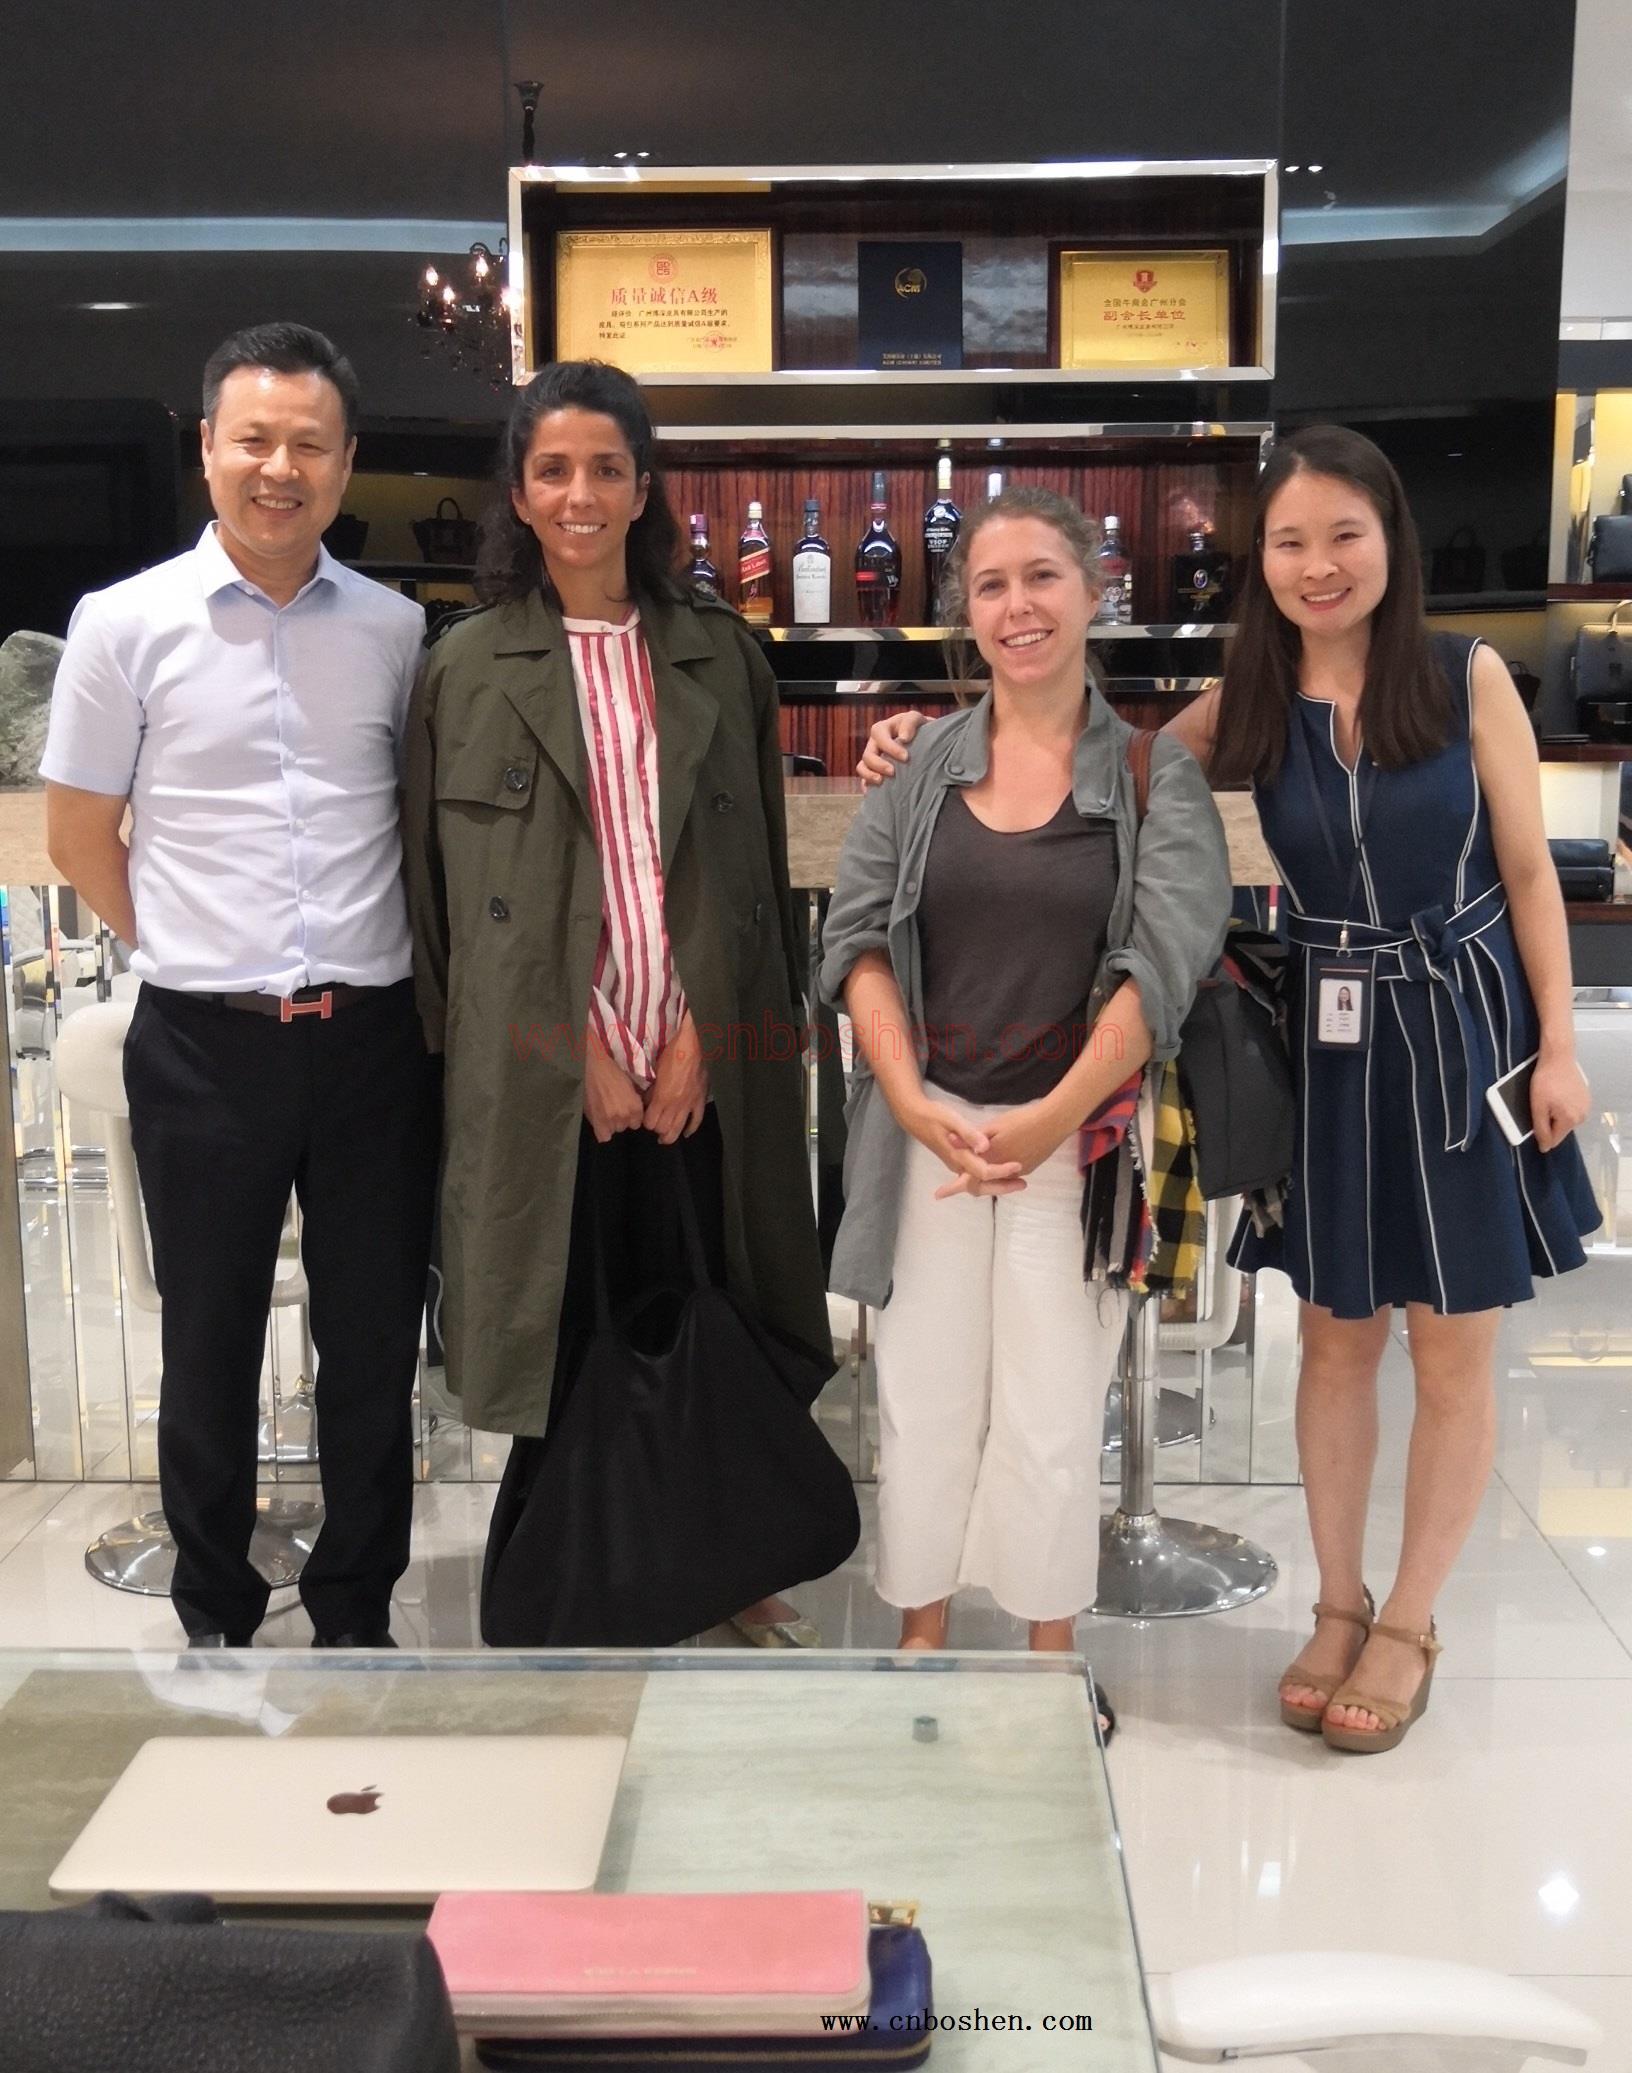 Representatives from a Spain-based Famous Brand Visit Guangzhou Boshen Leather Goods manufacturer